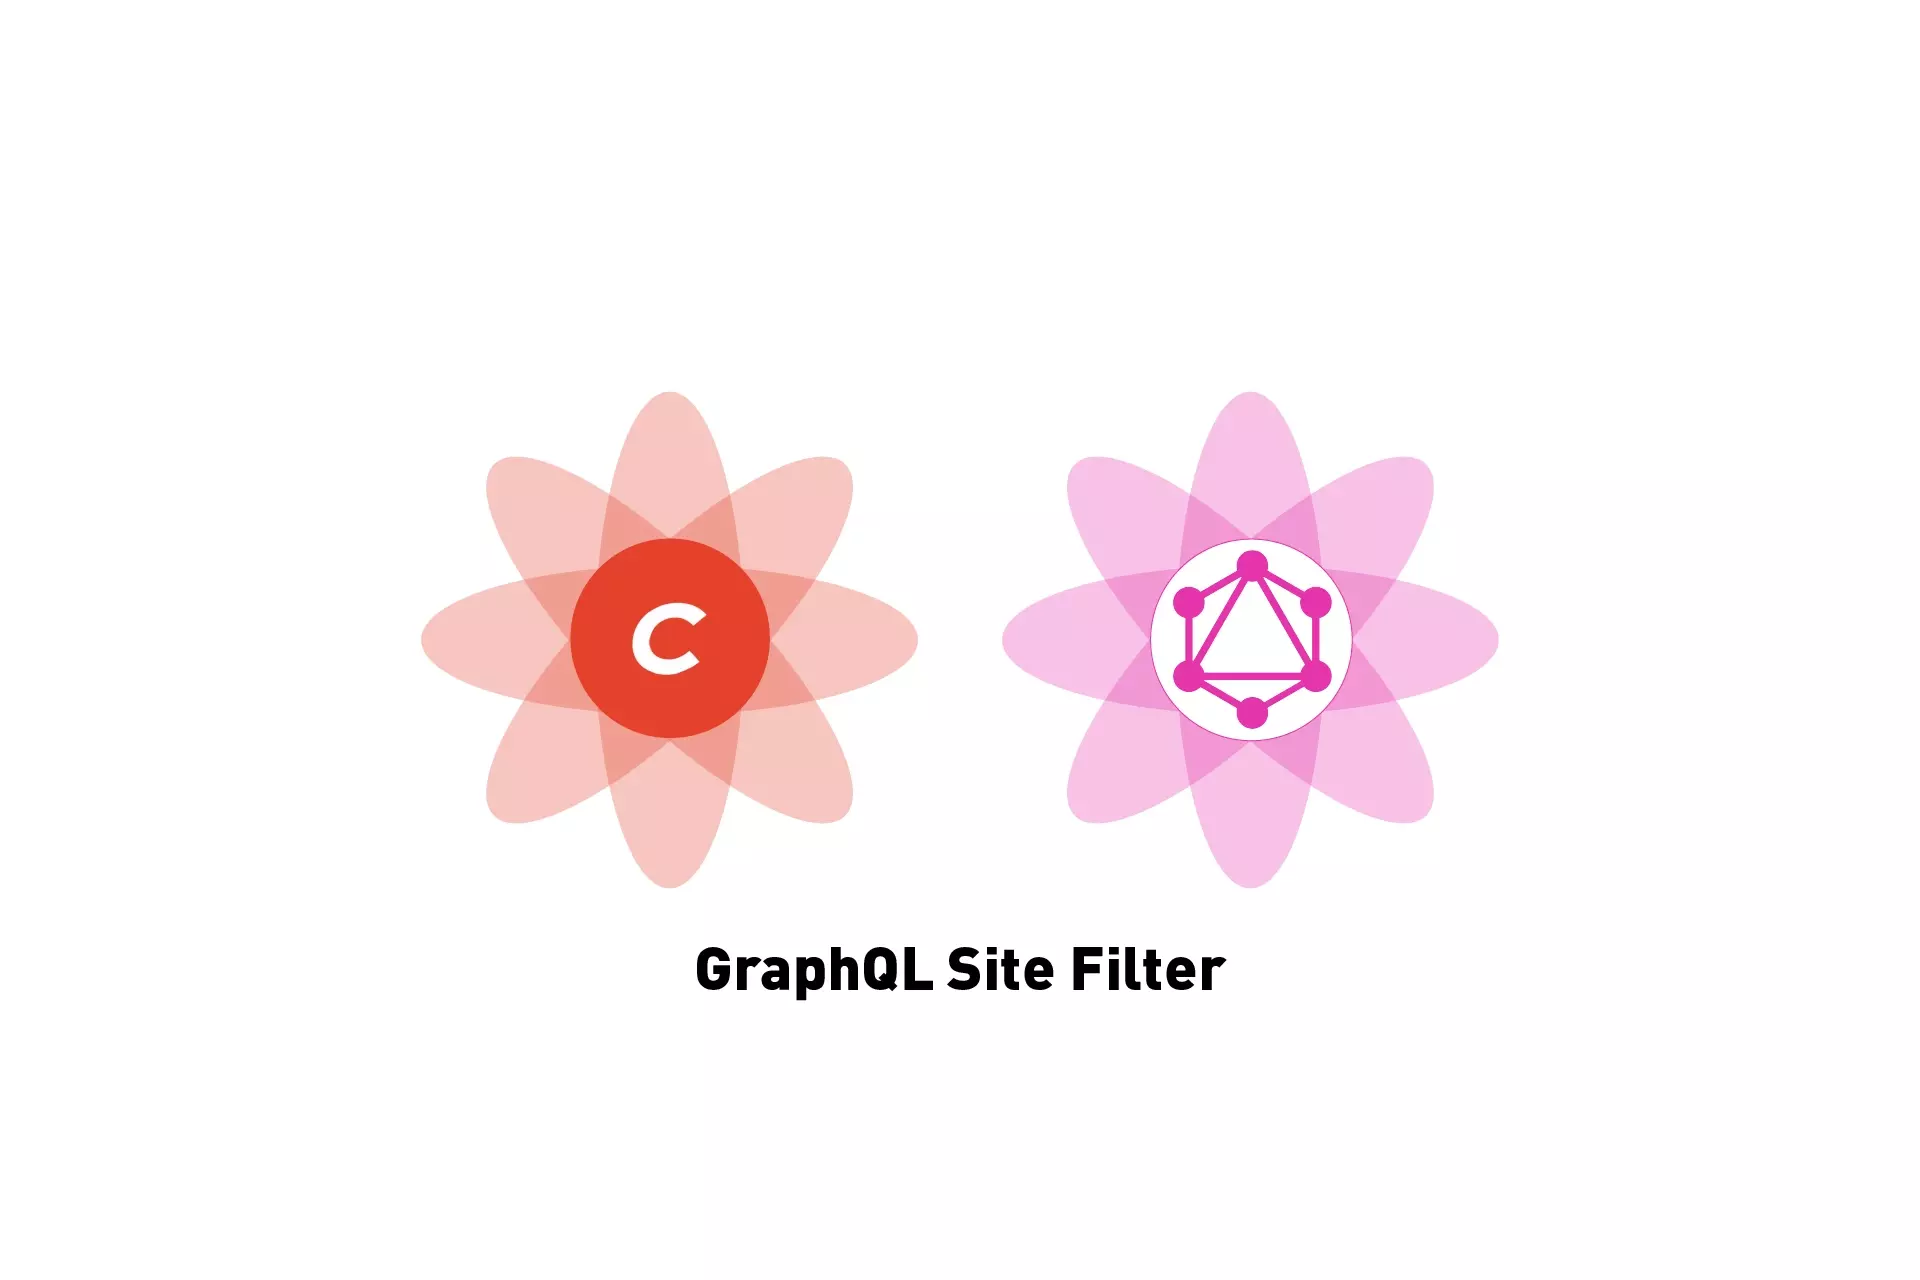 Two flowers that represents Craft CMS and GraphQL side by side with the text "GraphQL Site Filter" beneath it.